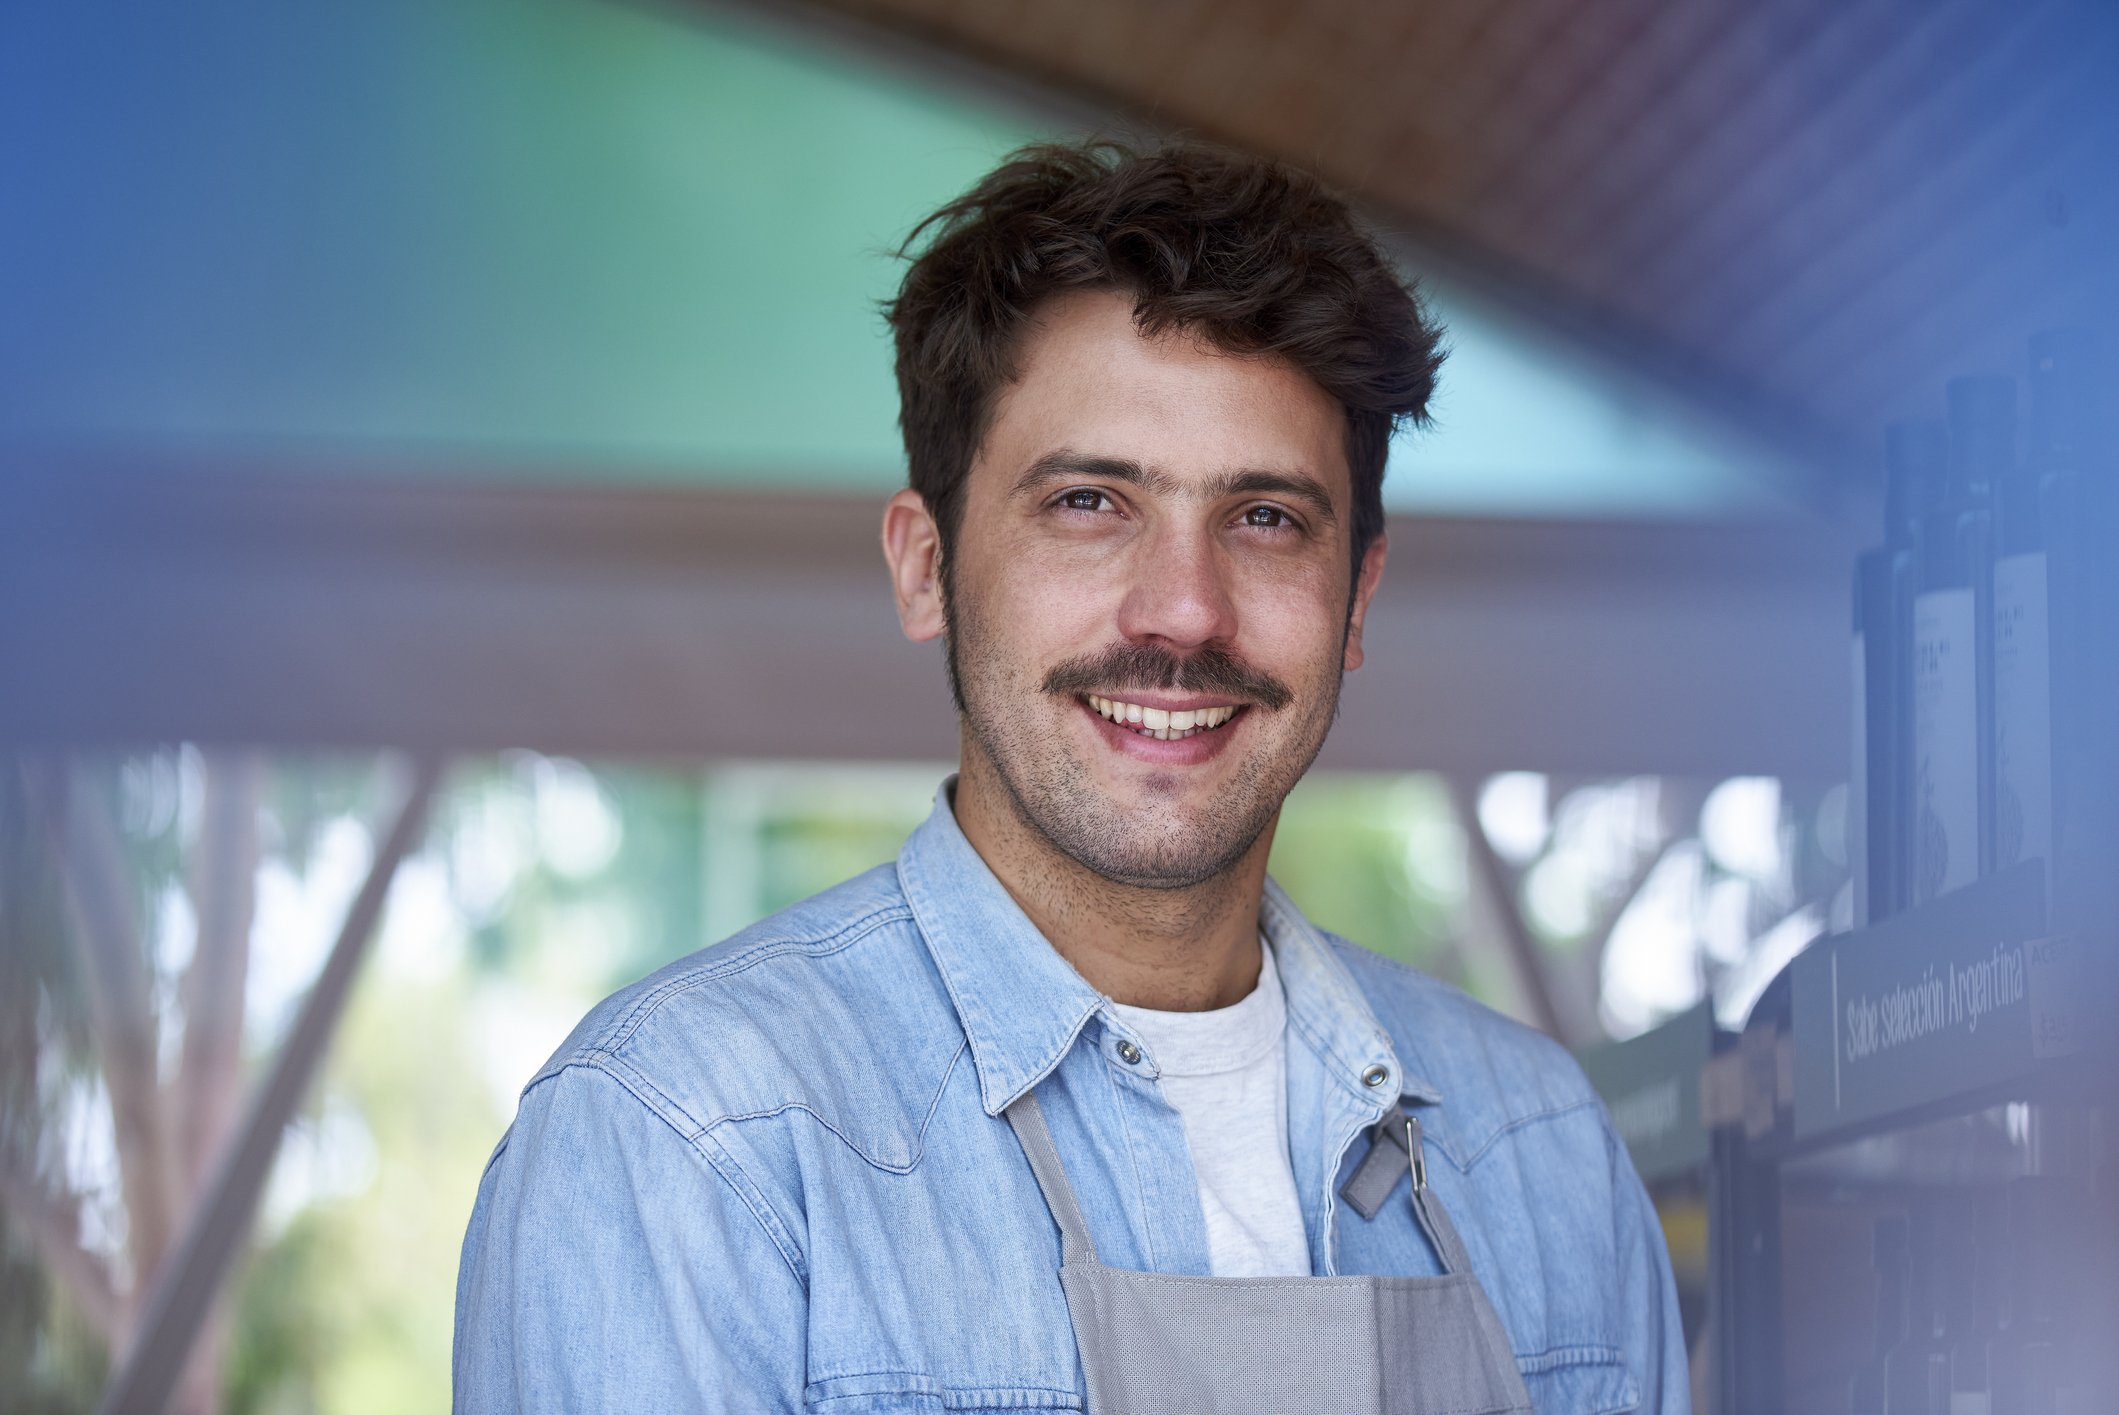 man with moustache and stubble beard smiling 